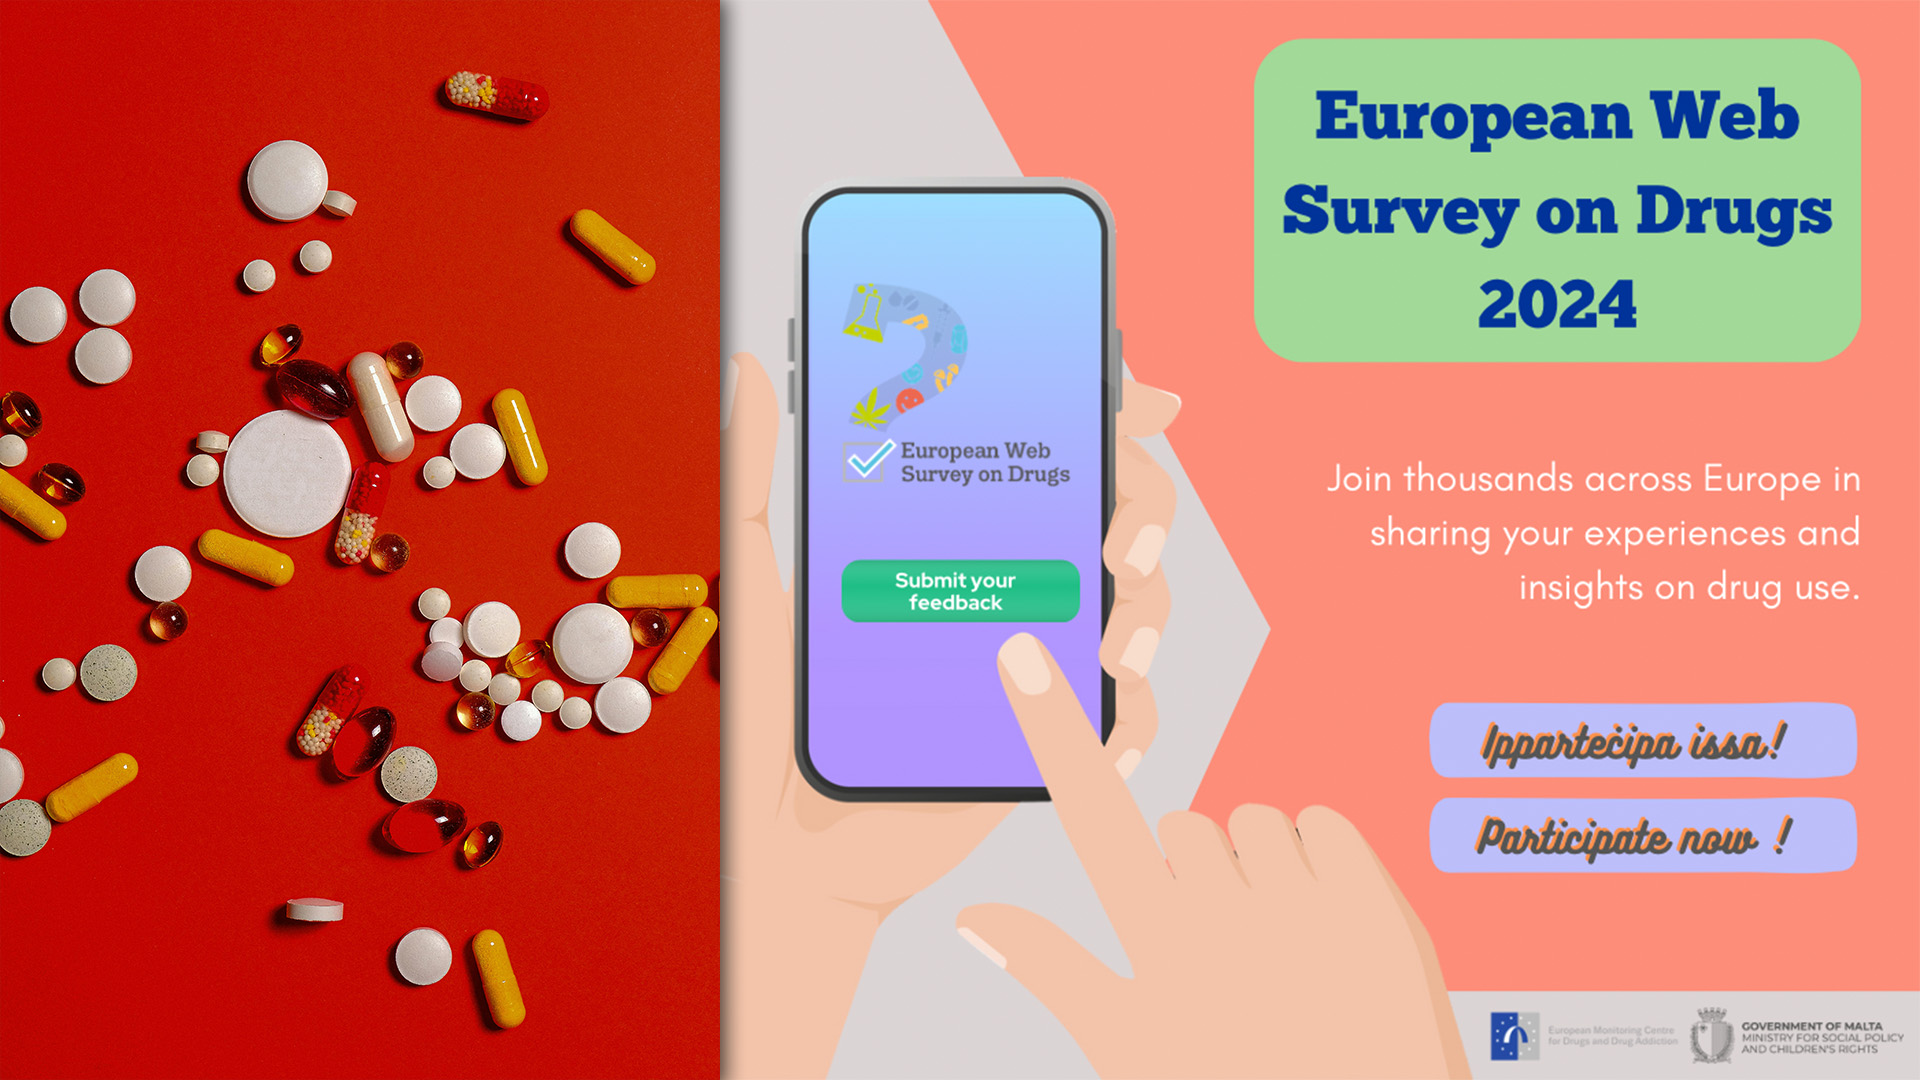 Participate in the European Web Survey on Drugs 2024!